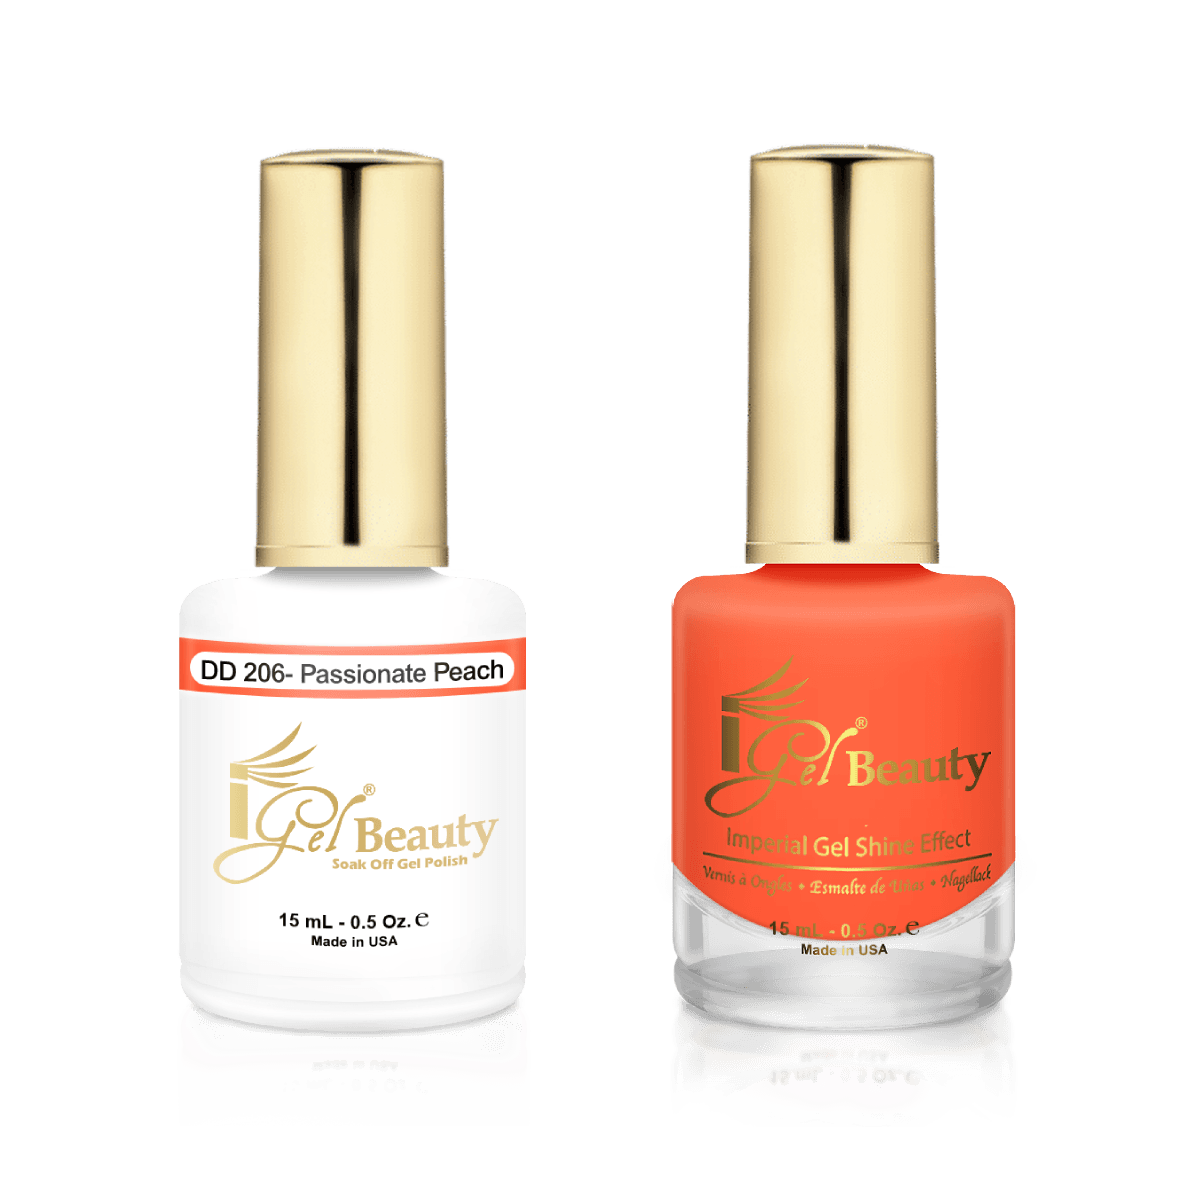 IGel Duo Gel Polish + Matching Nail Lacquer DD 206 PASSIONATE PEACH